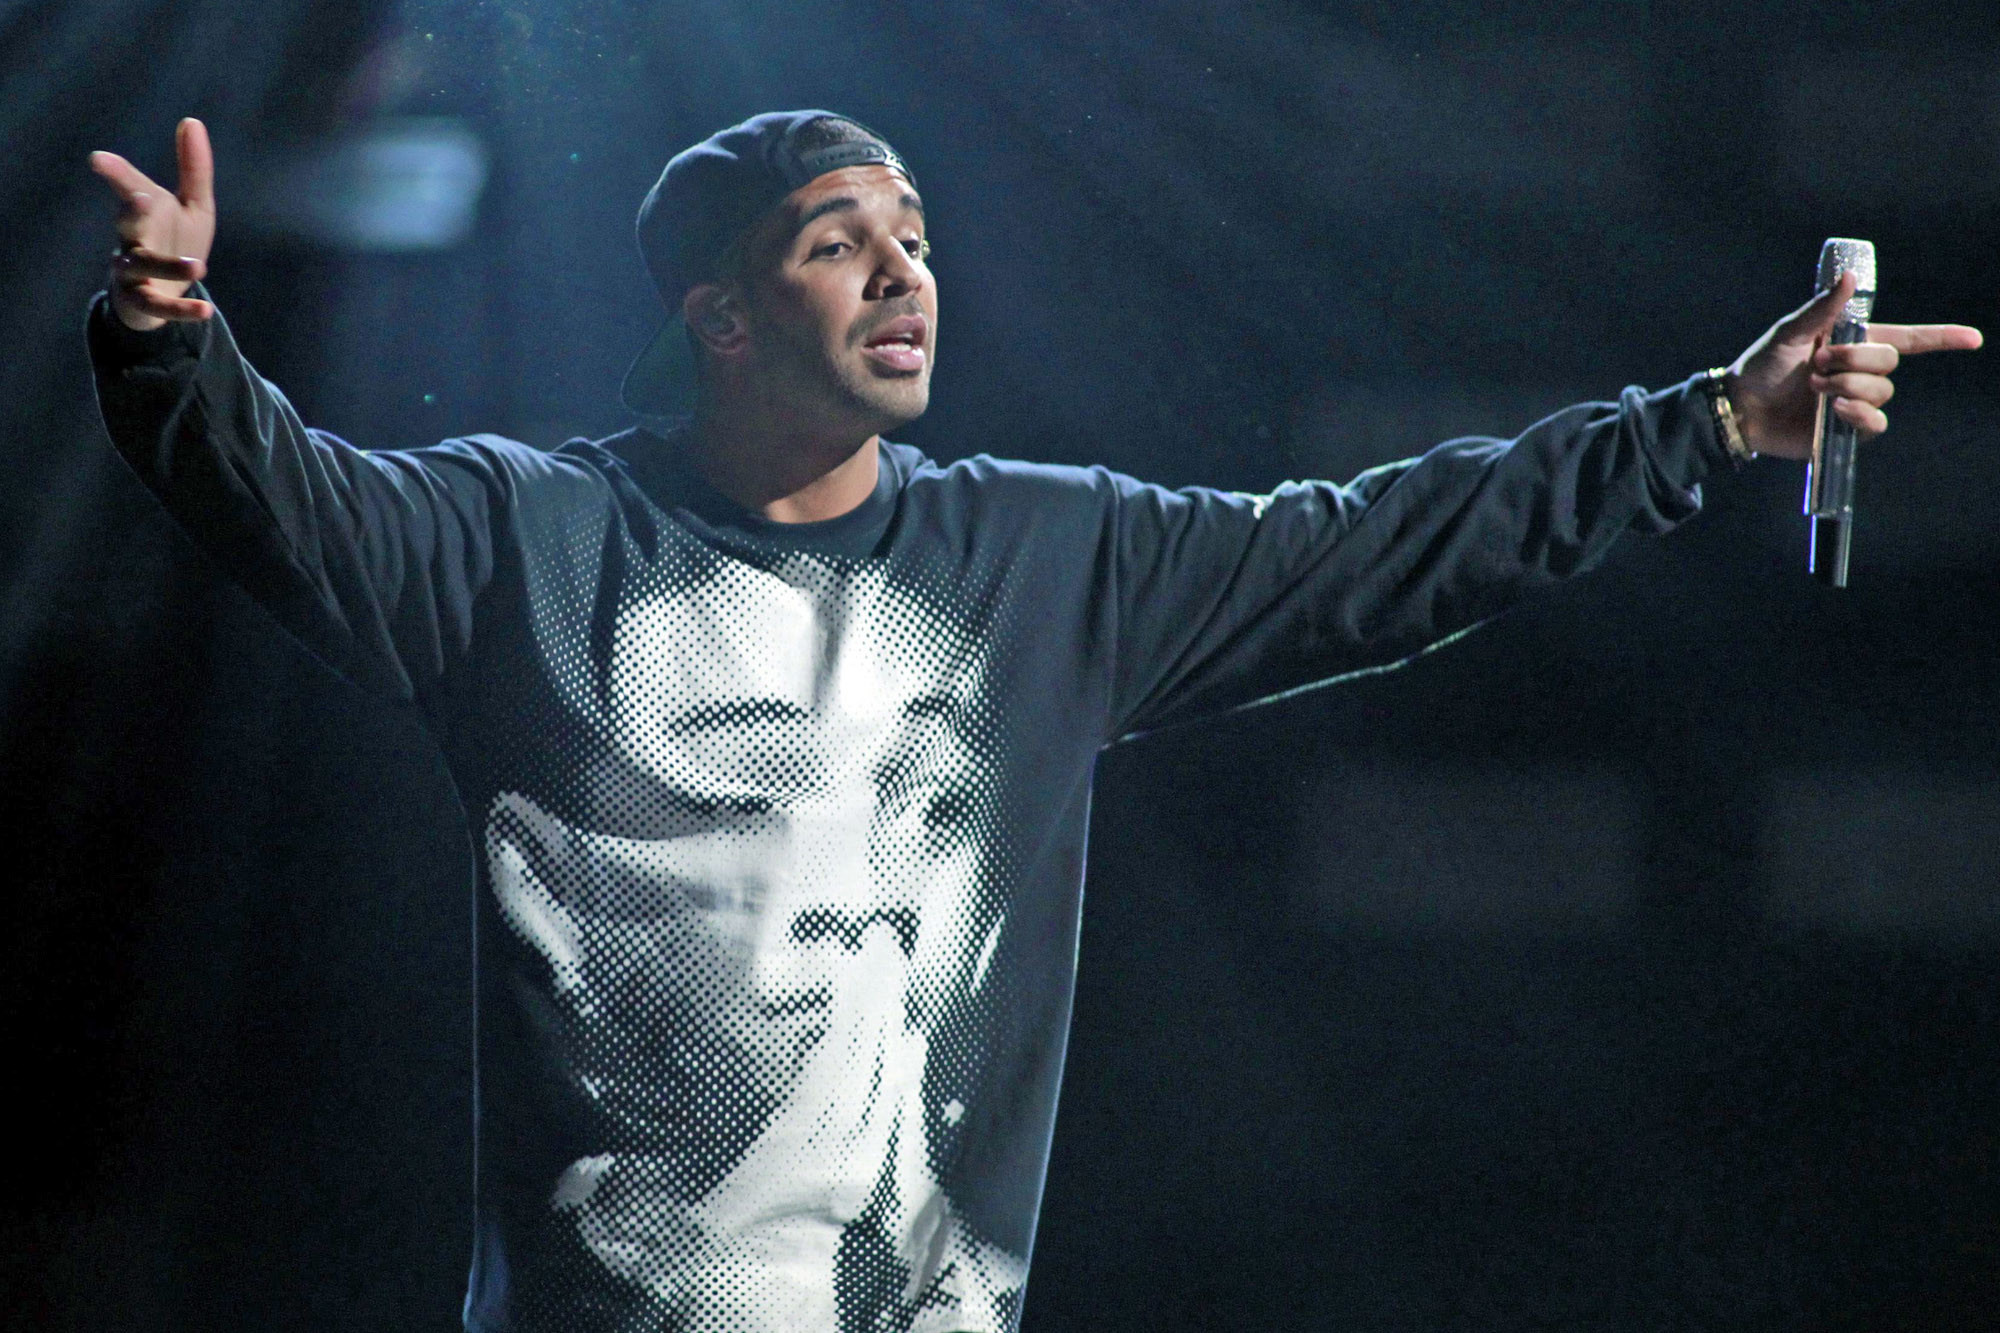 2000x1333 Drake performs during the iHeartRadio Music Festival in Las Vegas